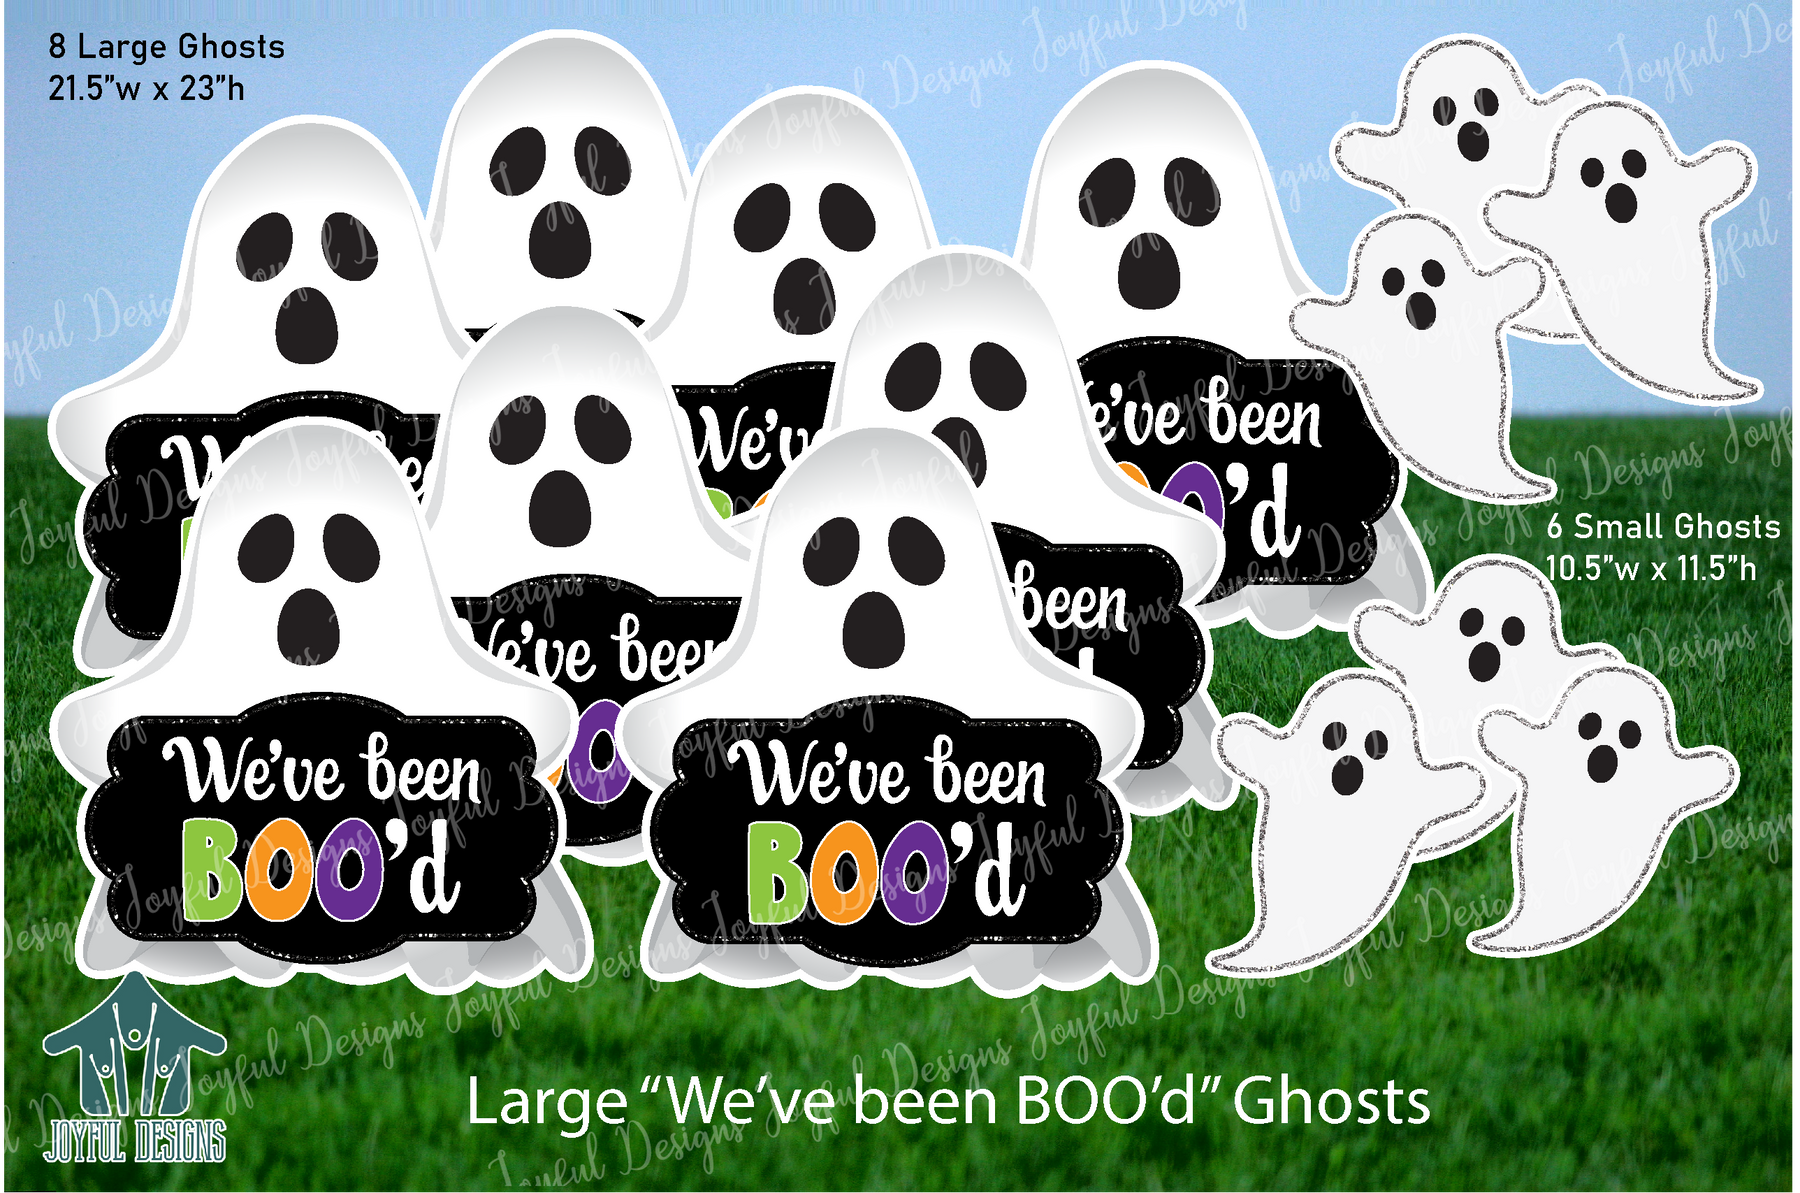 Large "We've Been Boo'd" Ghosts